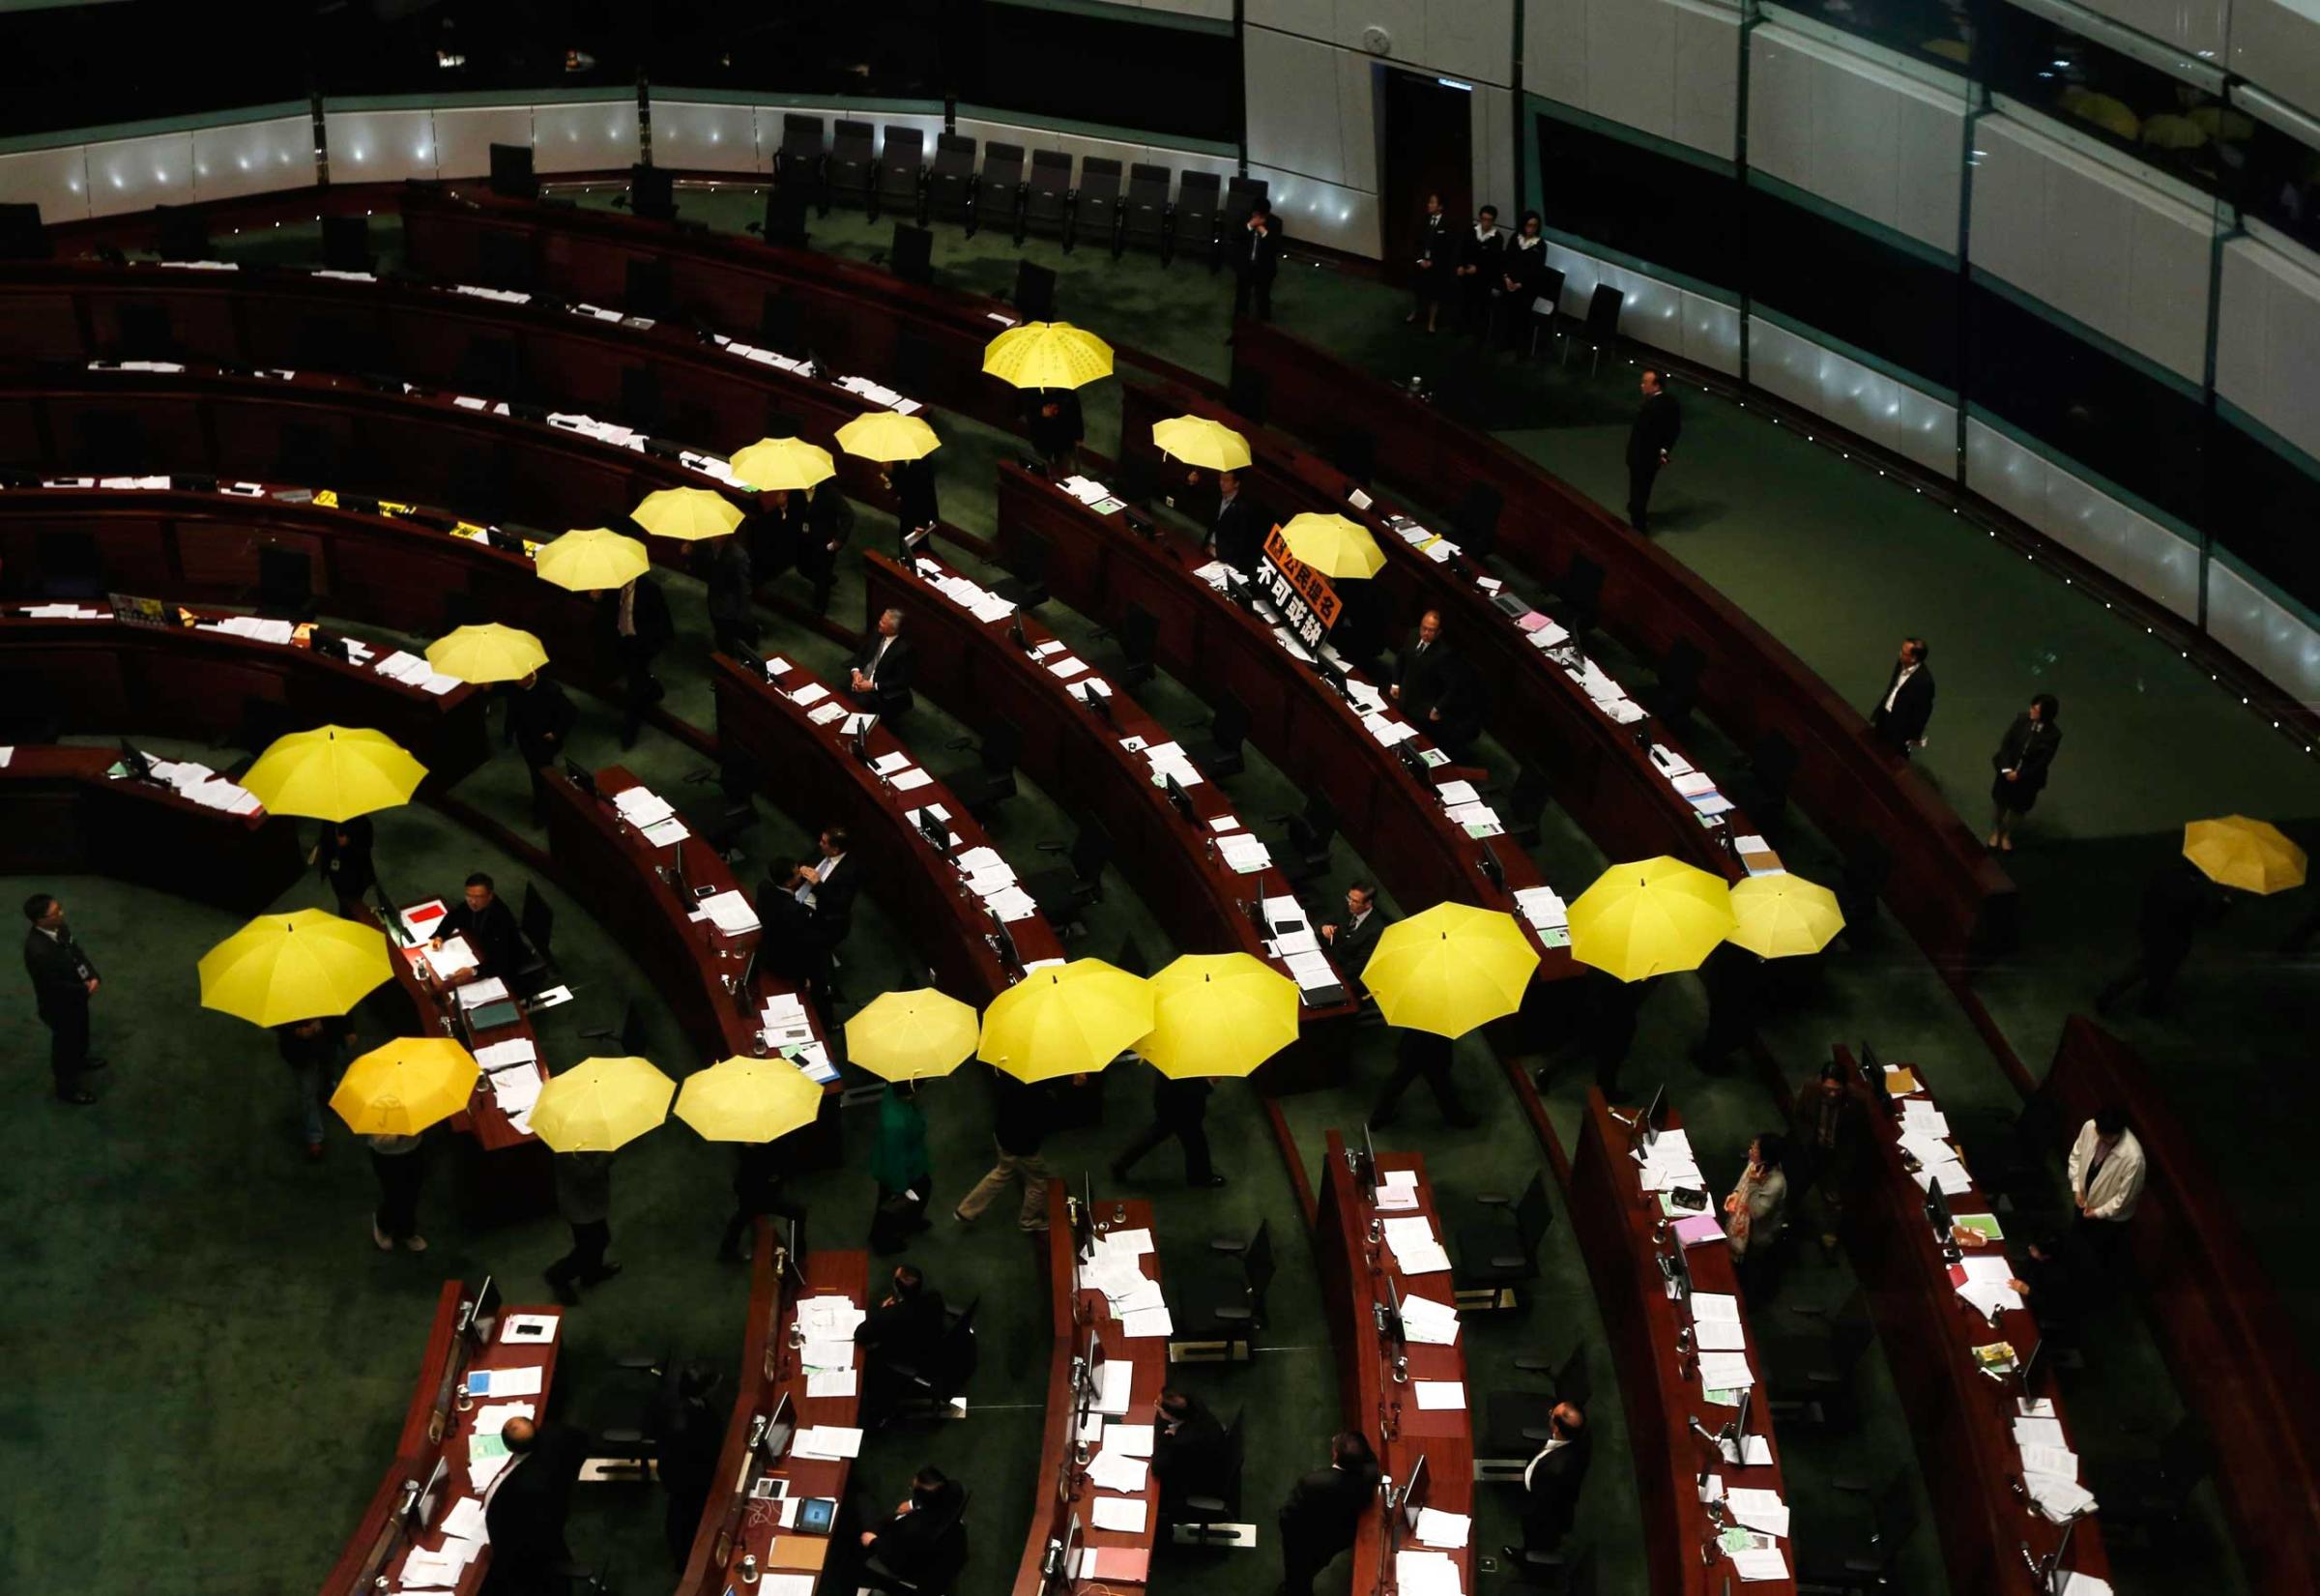 Jan. 7, 2015. Pro-democracy lawmakers carrying yellow umbrellas, symbols for the Occupy Central movement, leave in the middle of a Legislative Council meeting as a gesture to boycott the government in Hong Kong.